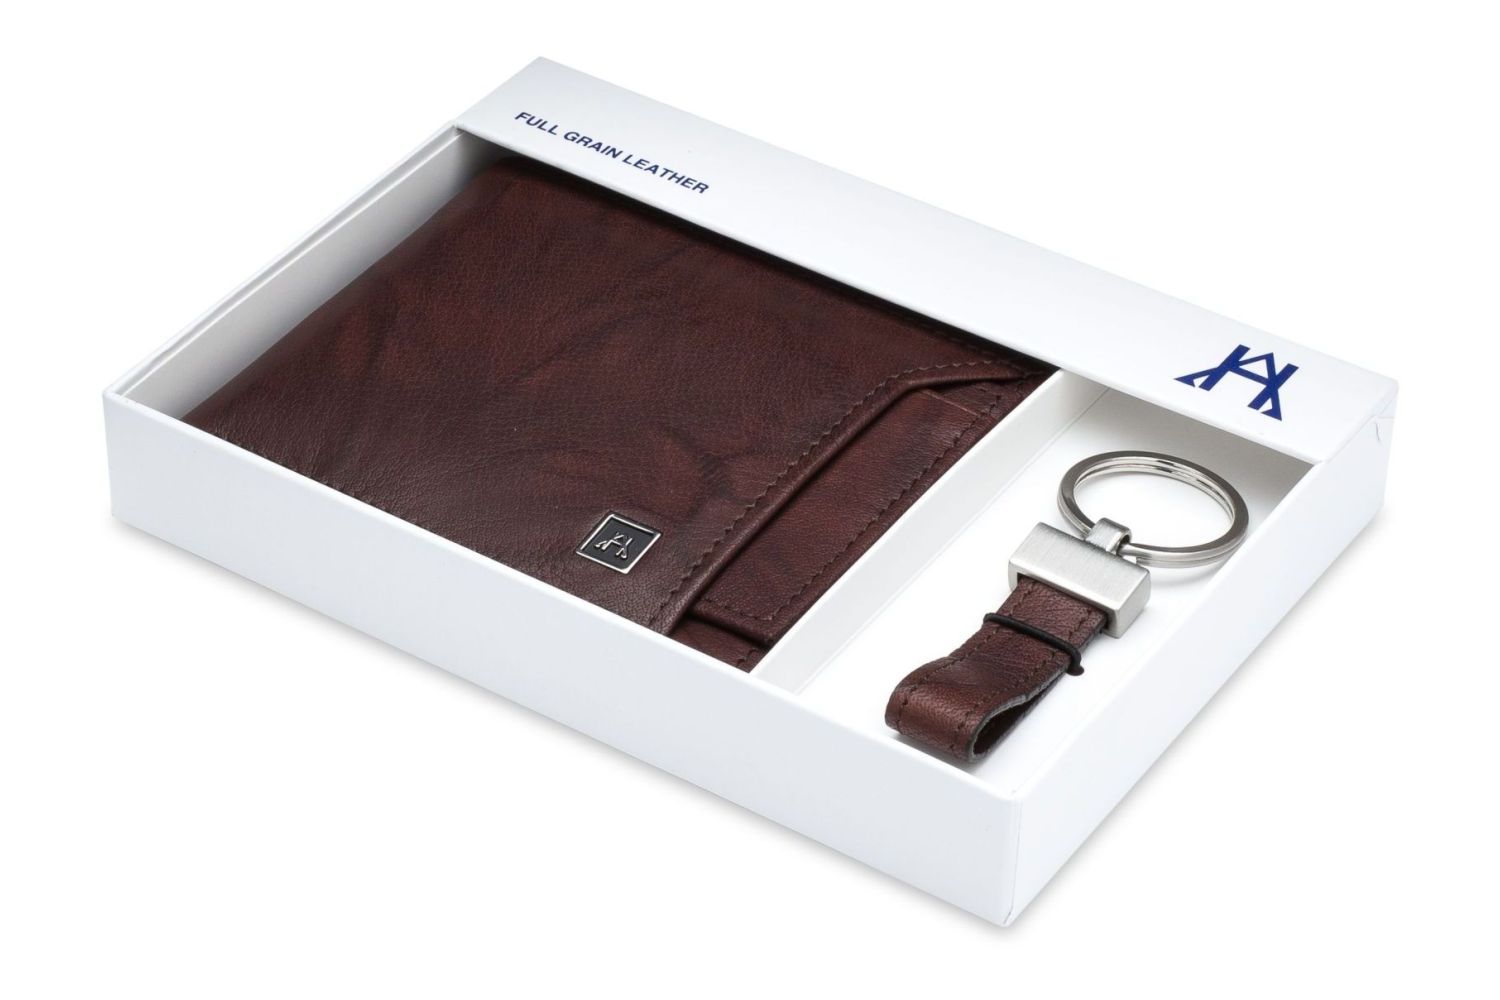 Products - Full Grain Leather Wallets - A&H Leather Goods